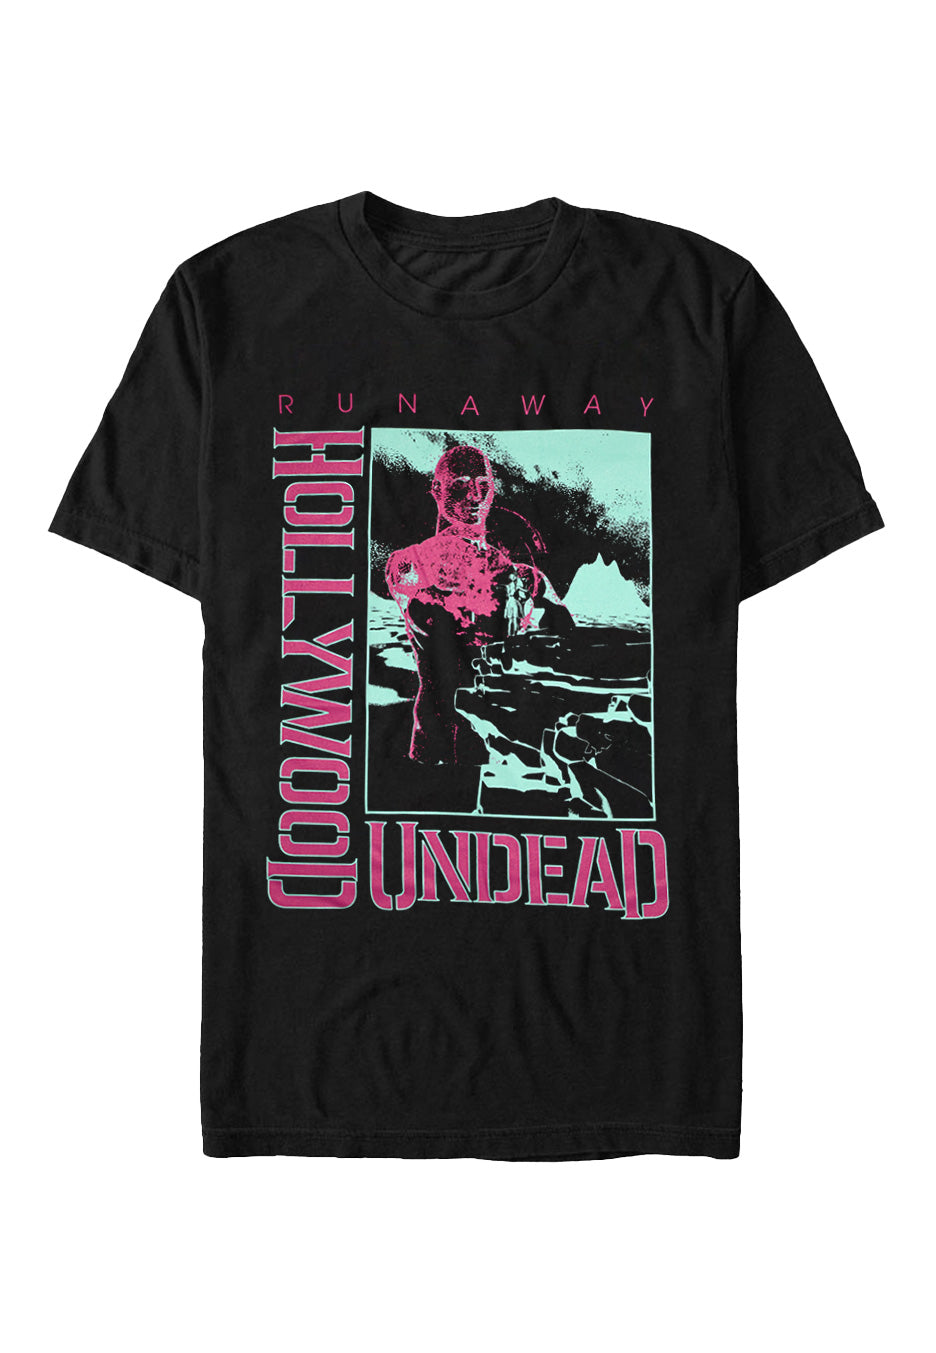 Hollywood Undead - Never - T-Shirt